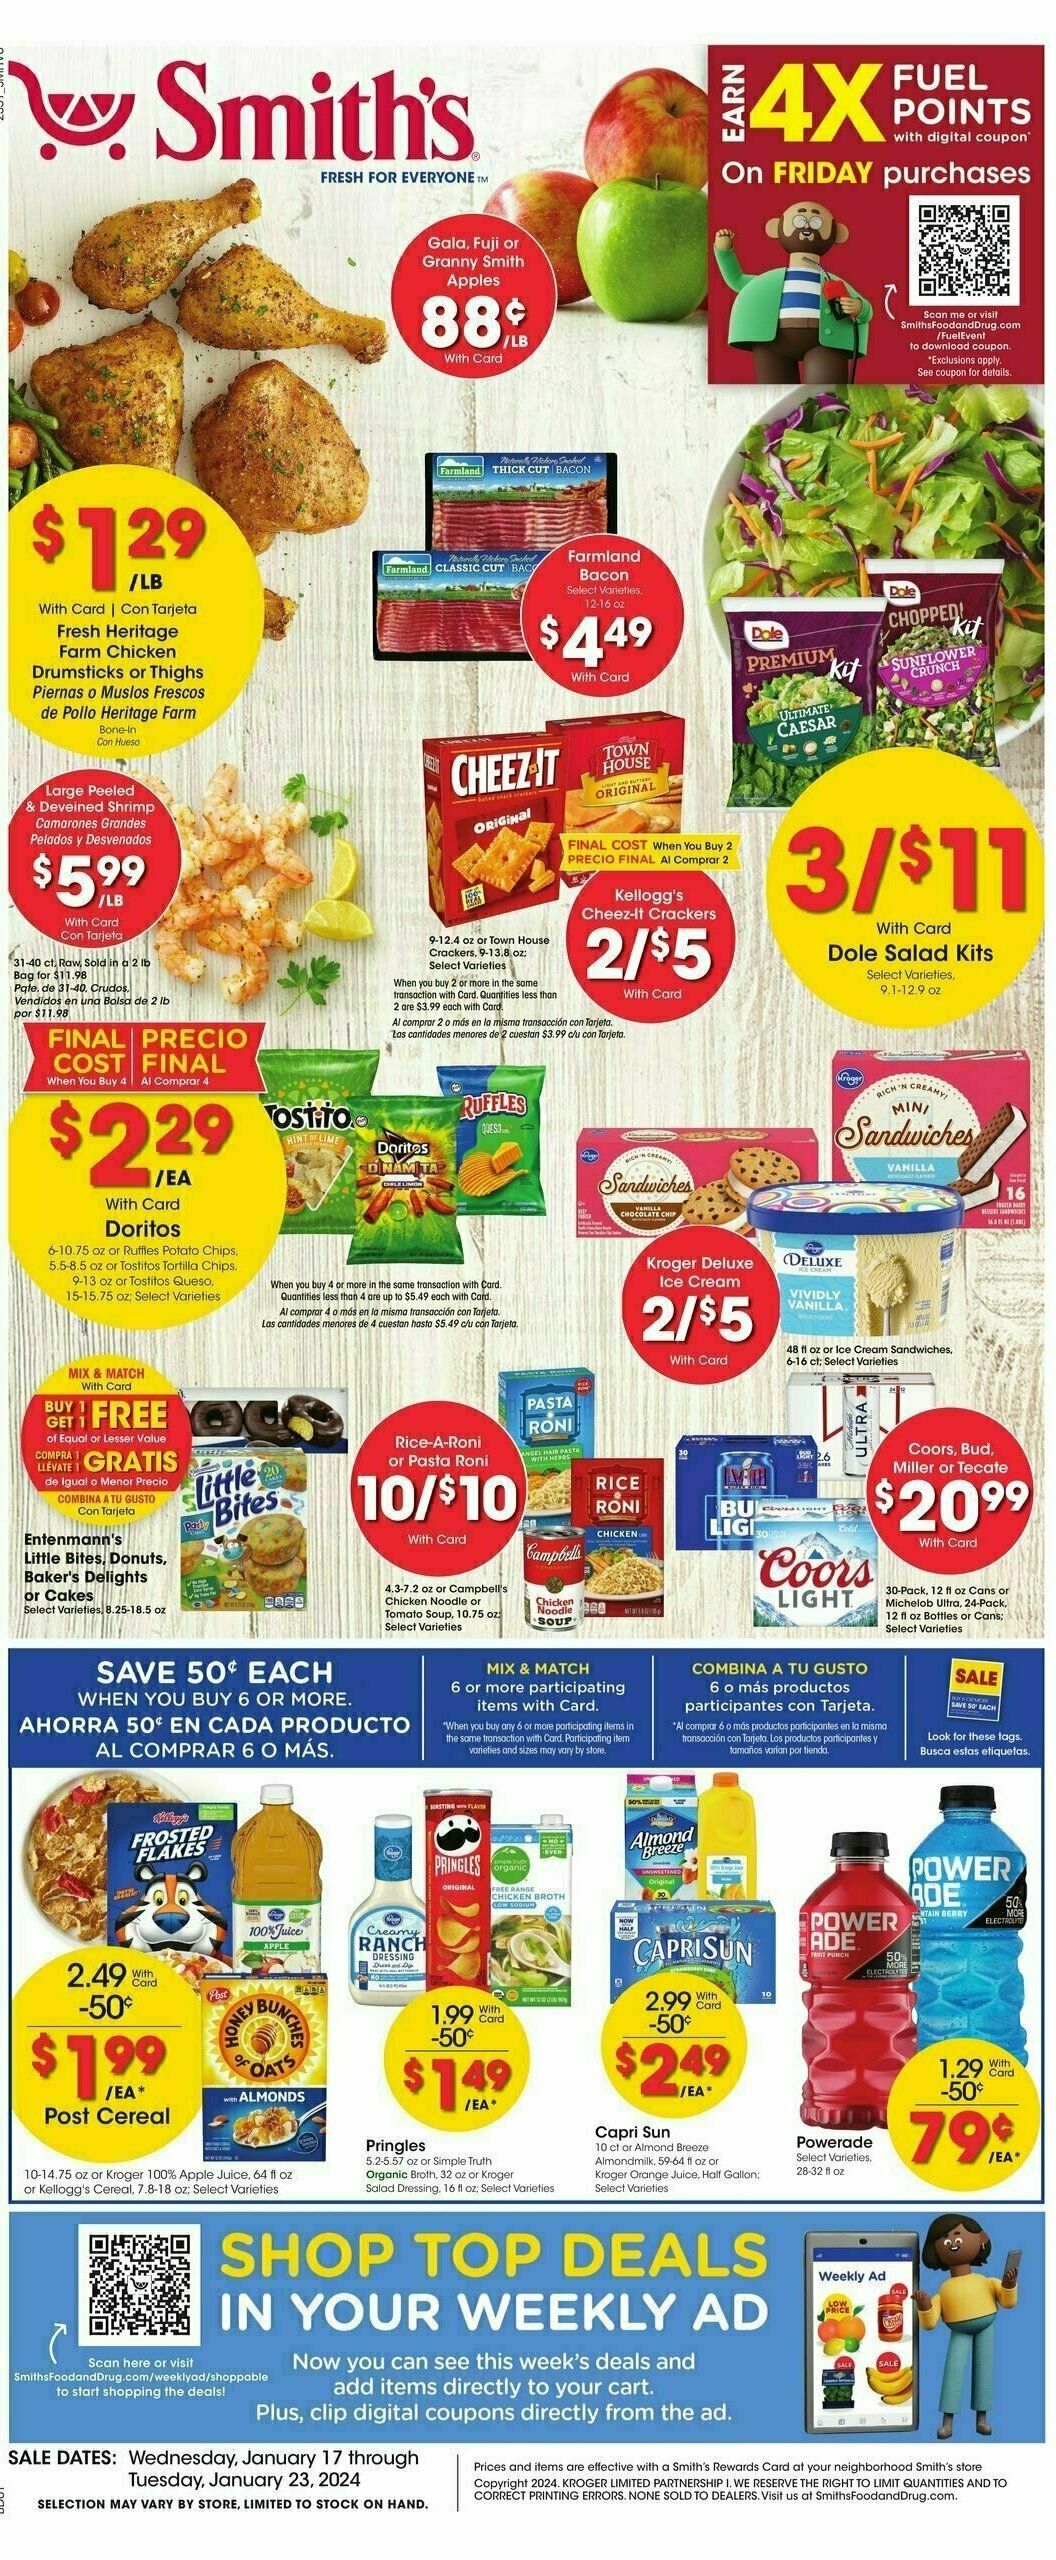 Smith's Weekly Ad from January 17